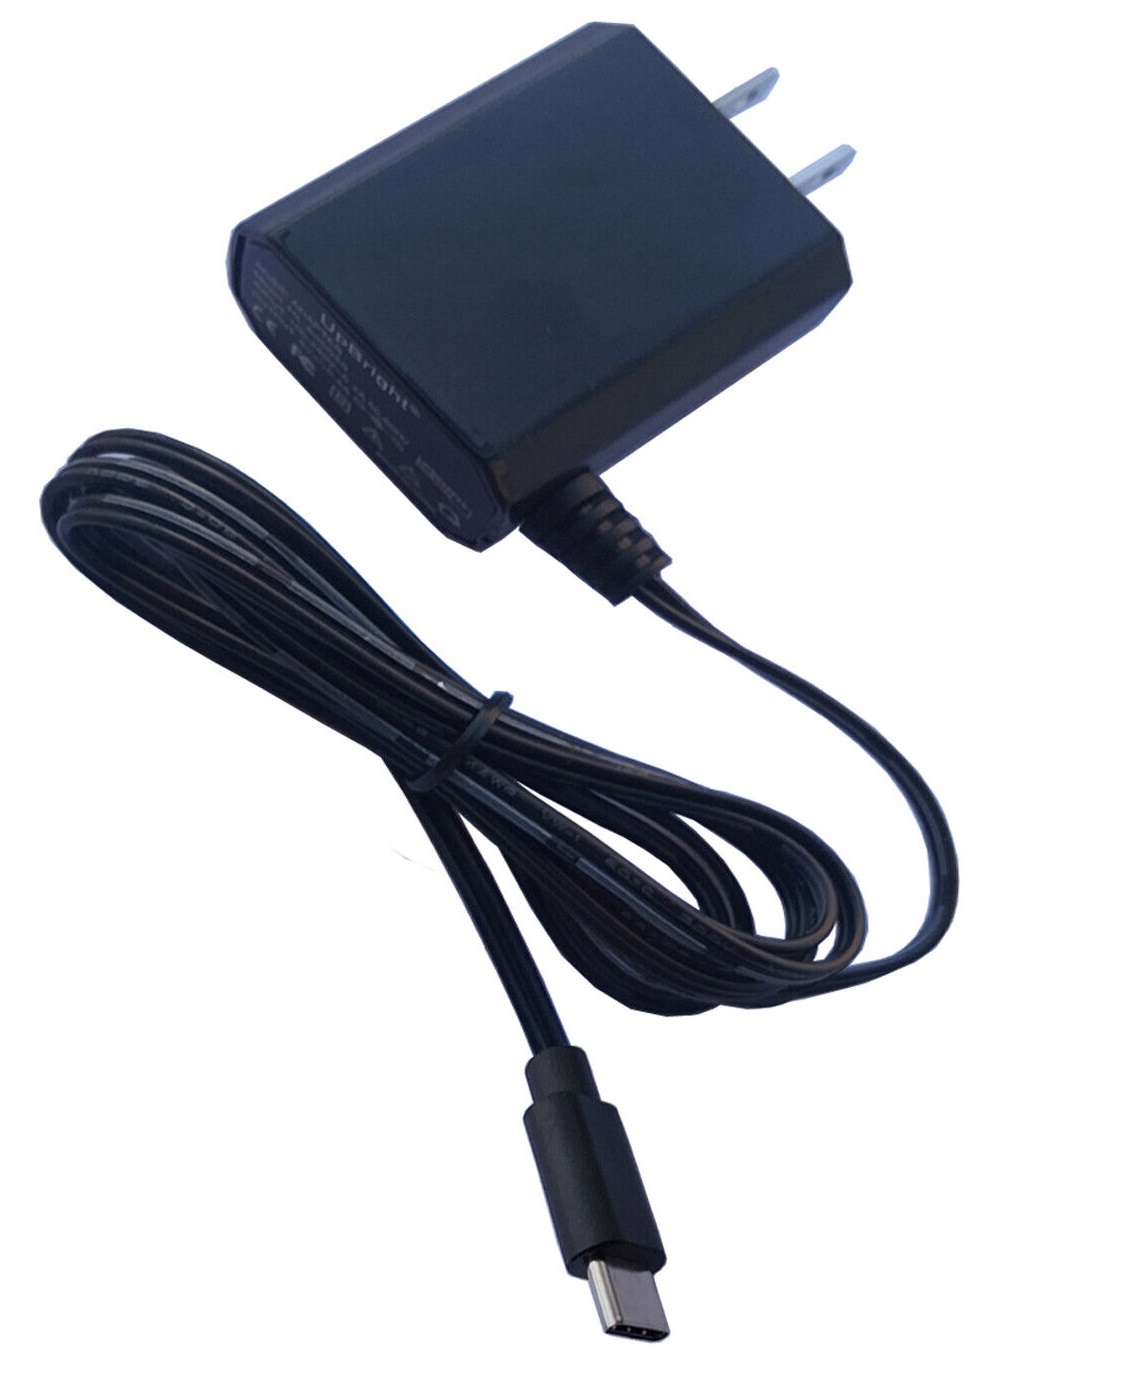 *Brand NEW* DC 7.4V 2000mAh AC Adapter USB DC Cable For RENPHO Reach C007 R-C007 RC007 Muscle Massage Gun - Click Image to Close